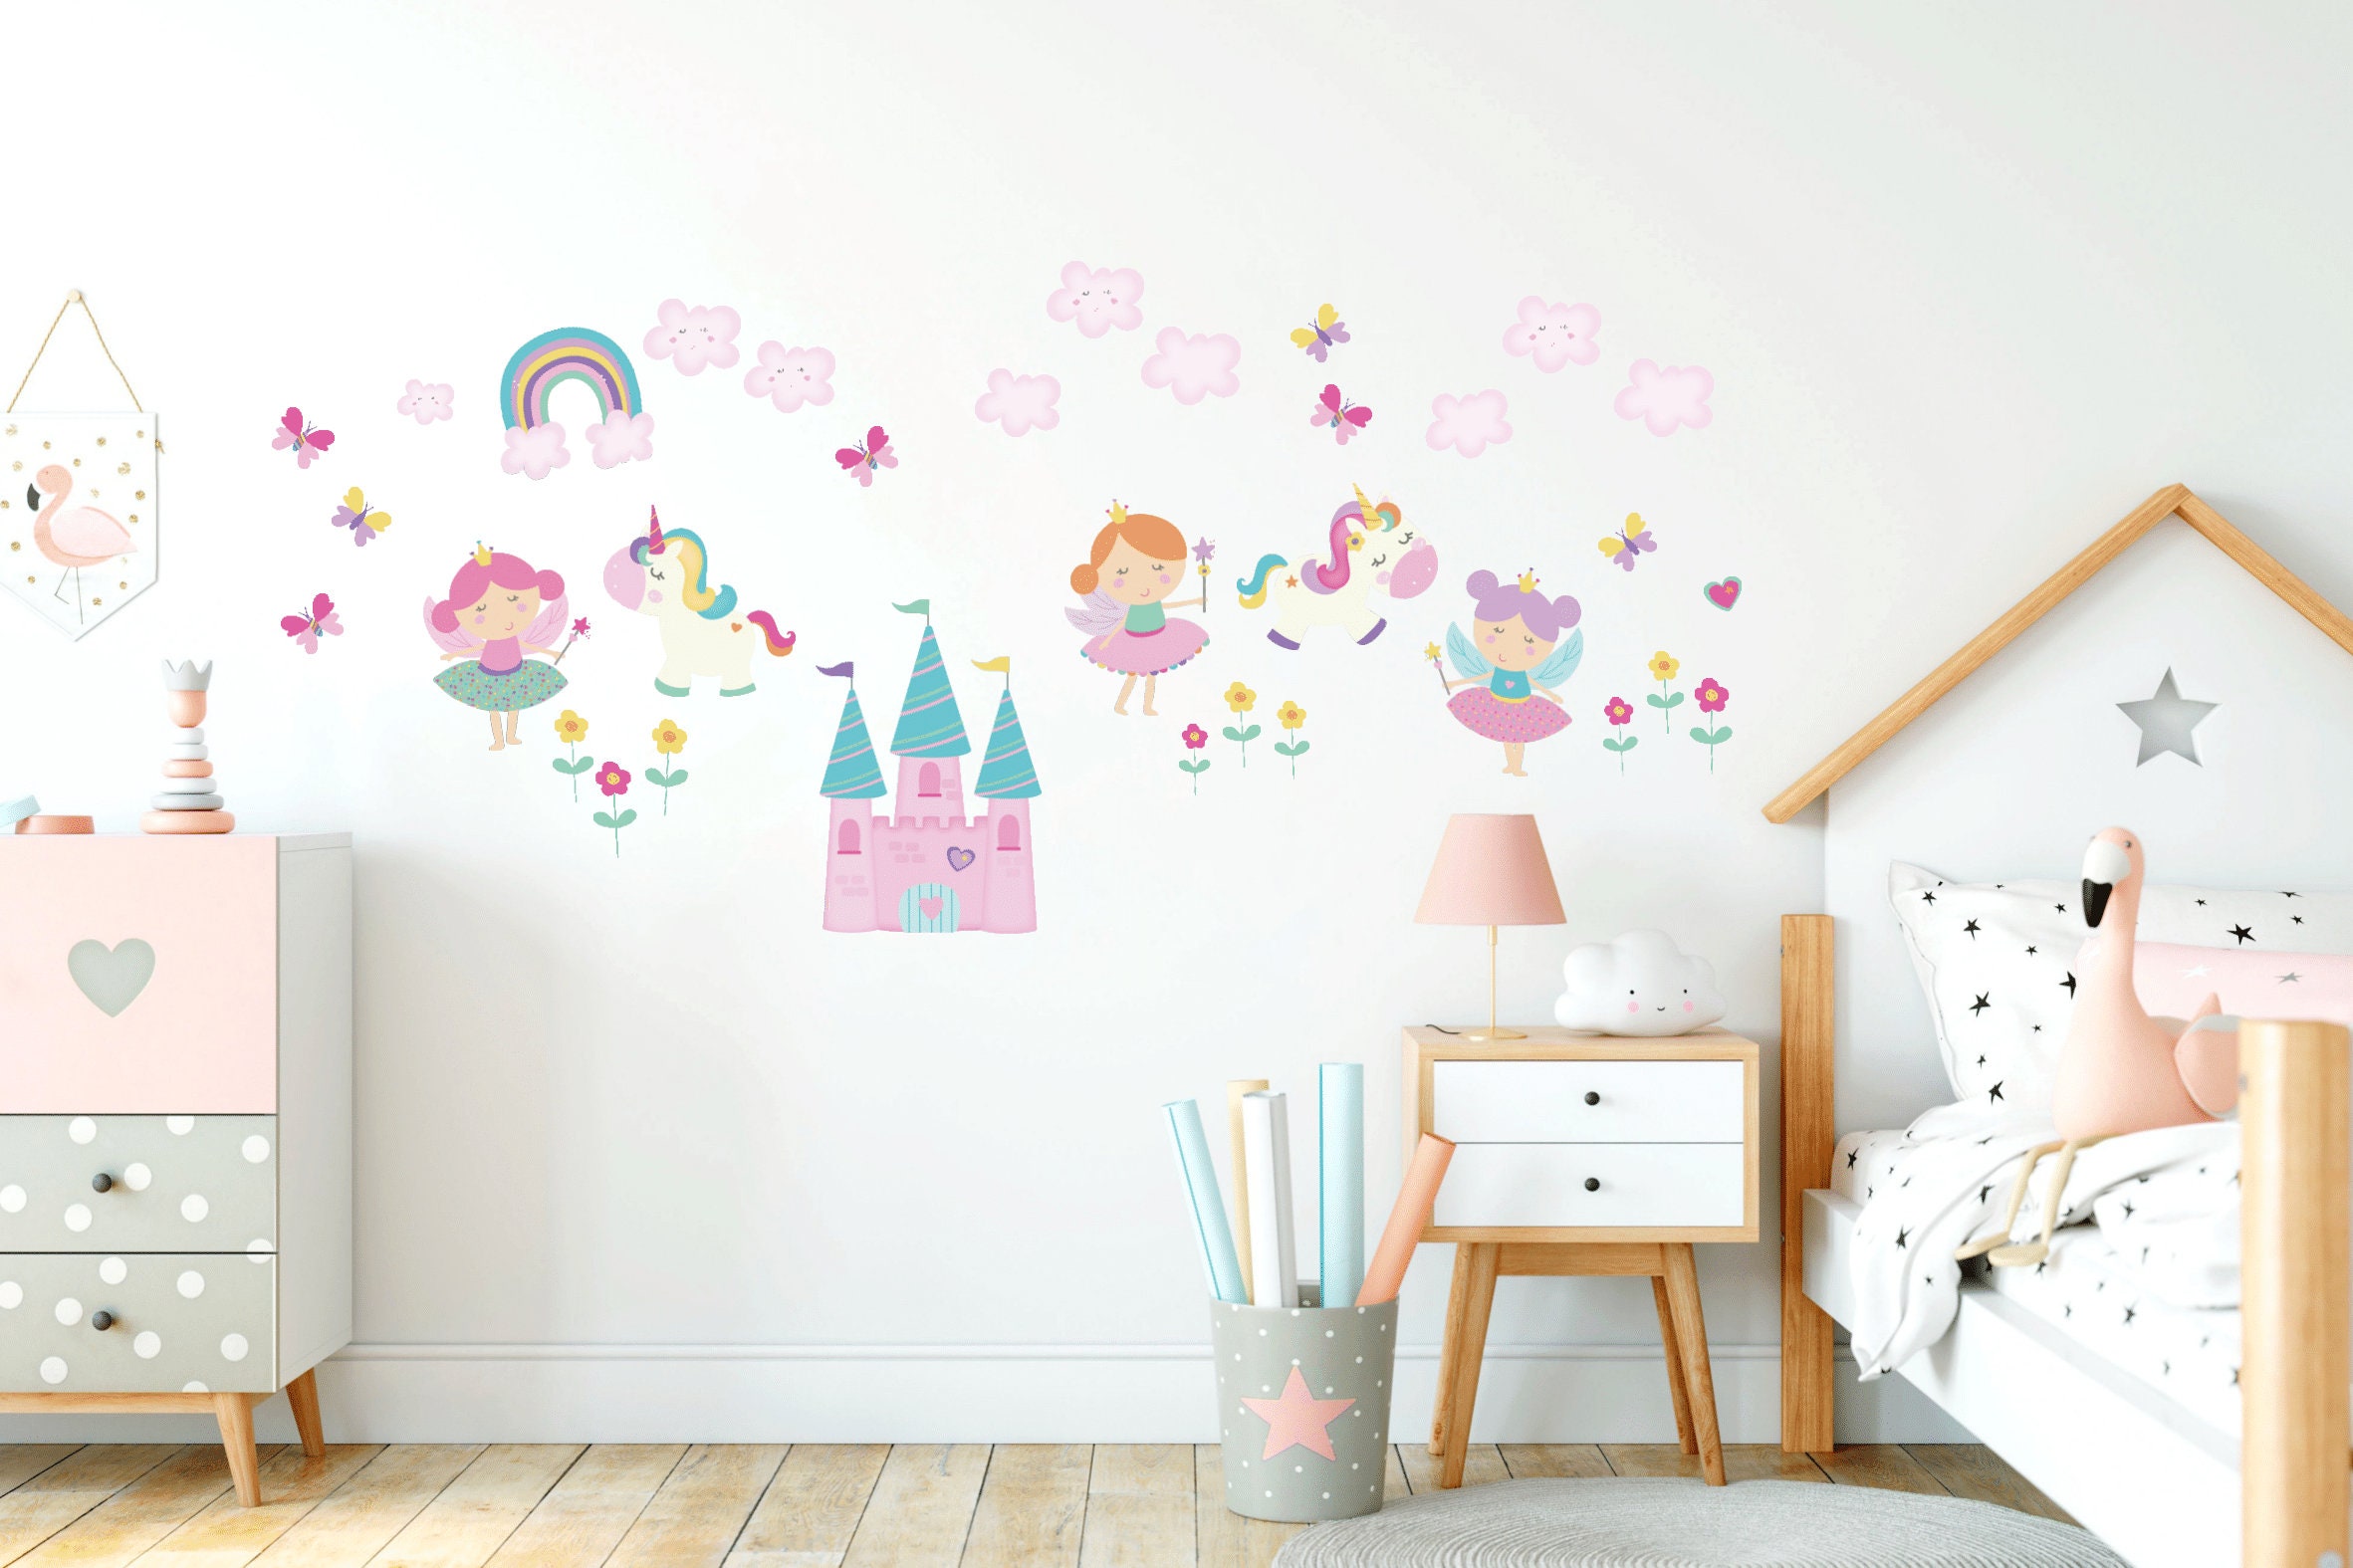 Fairy Unicorn  Wall Stickers snowflakes  Dots  Girls Kids Room Removable Decor 